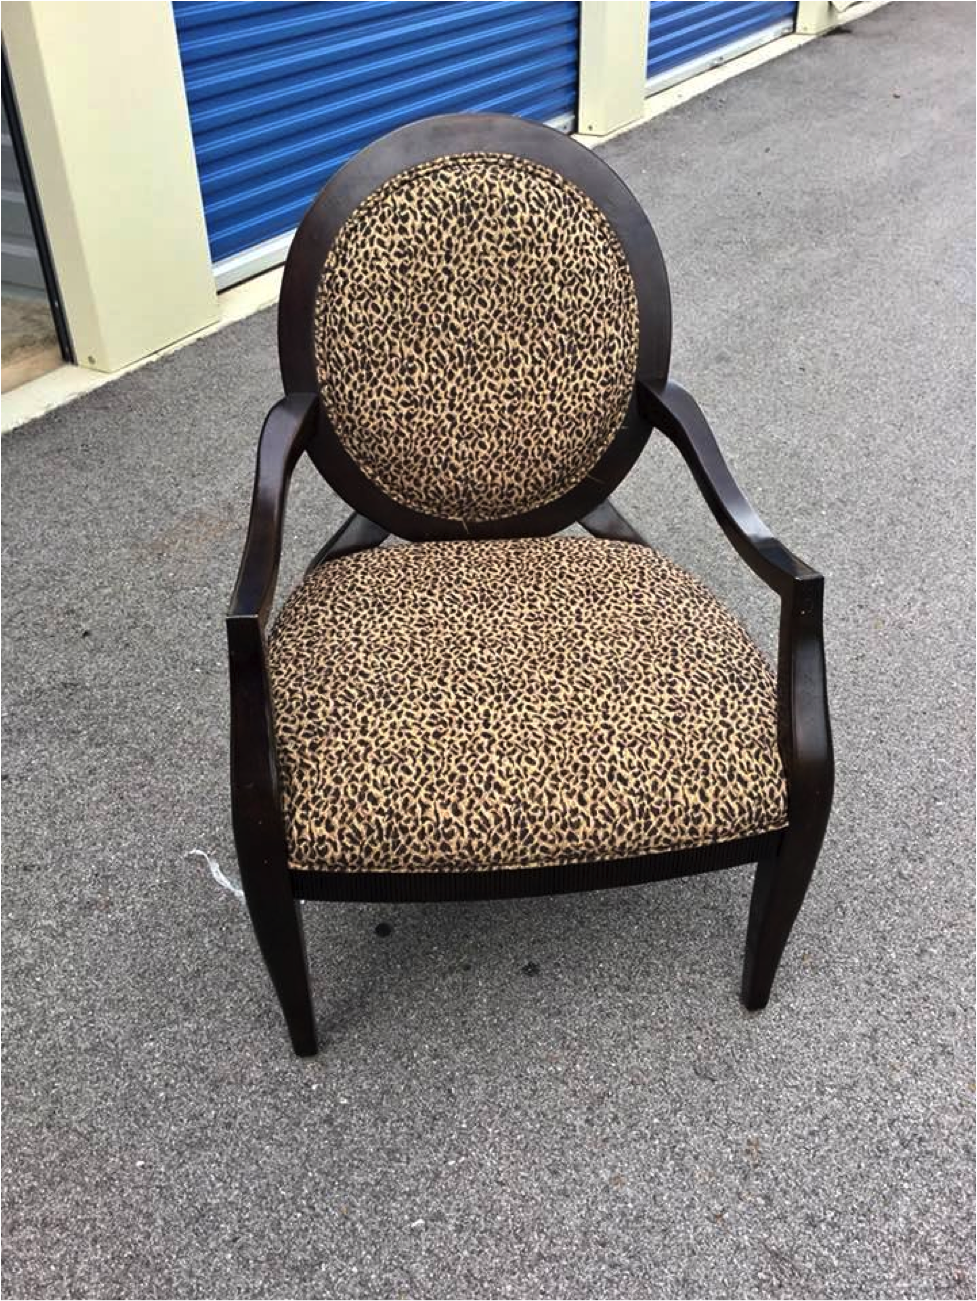 Leopard Print Chair Applewhite Movers